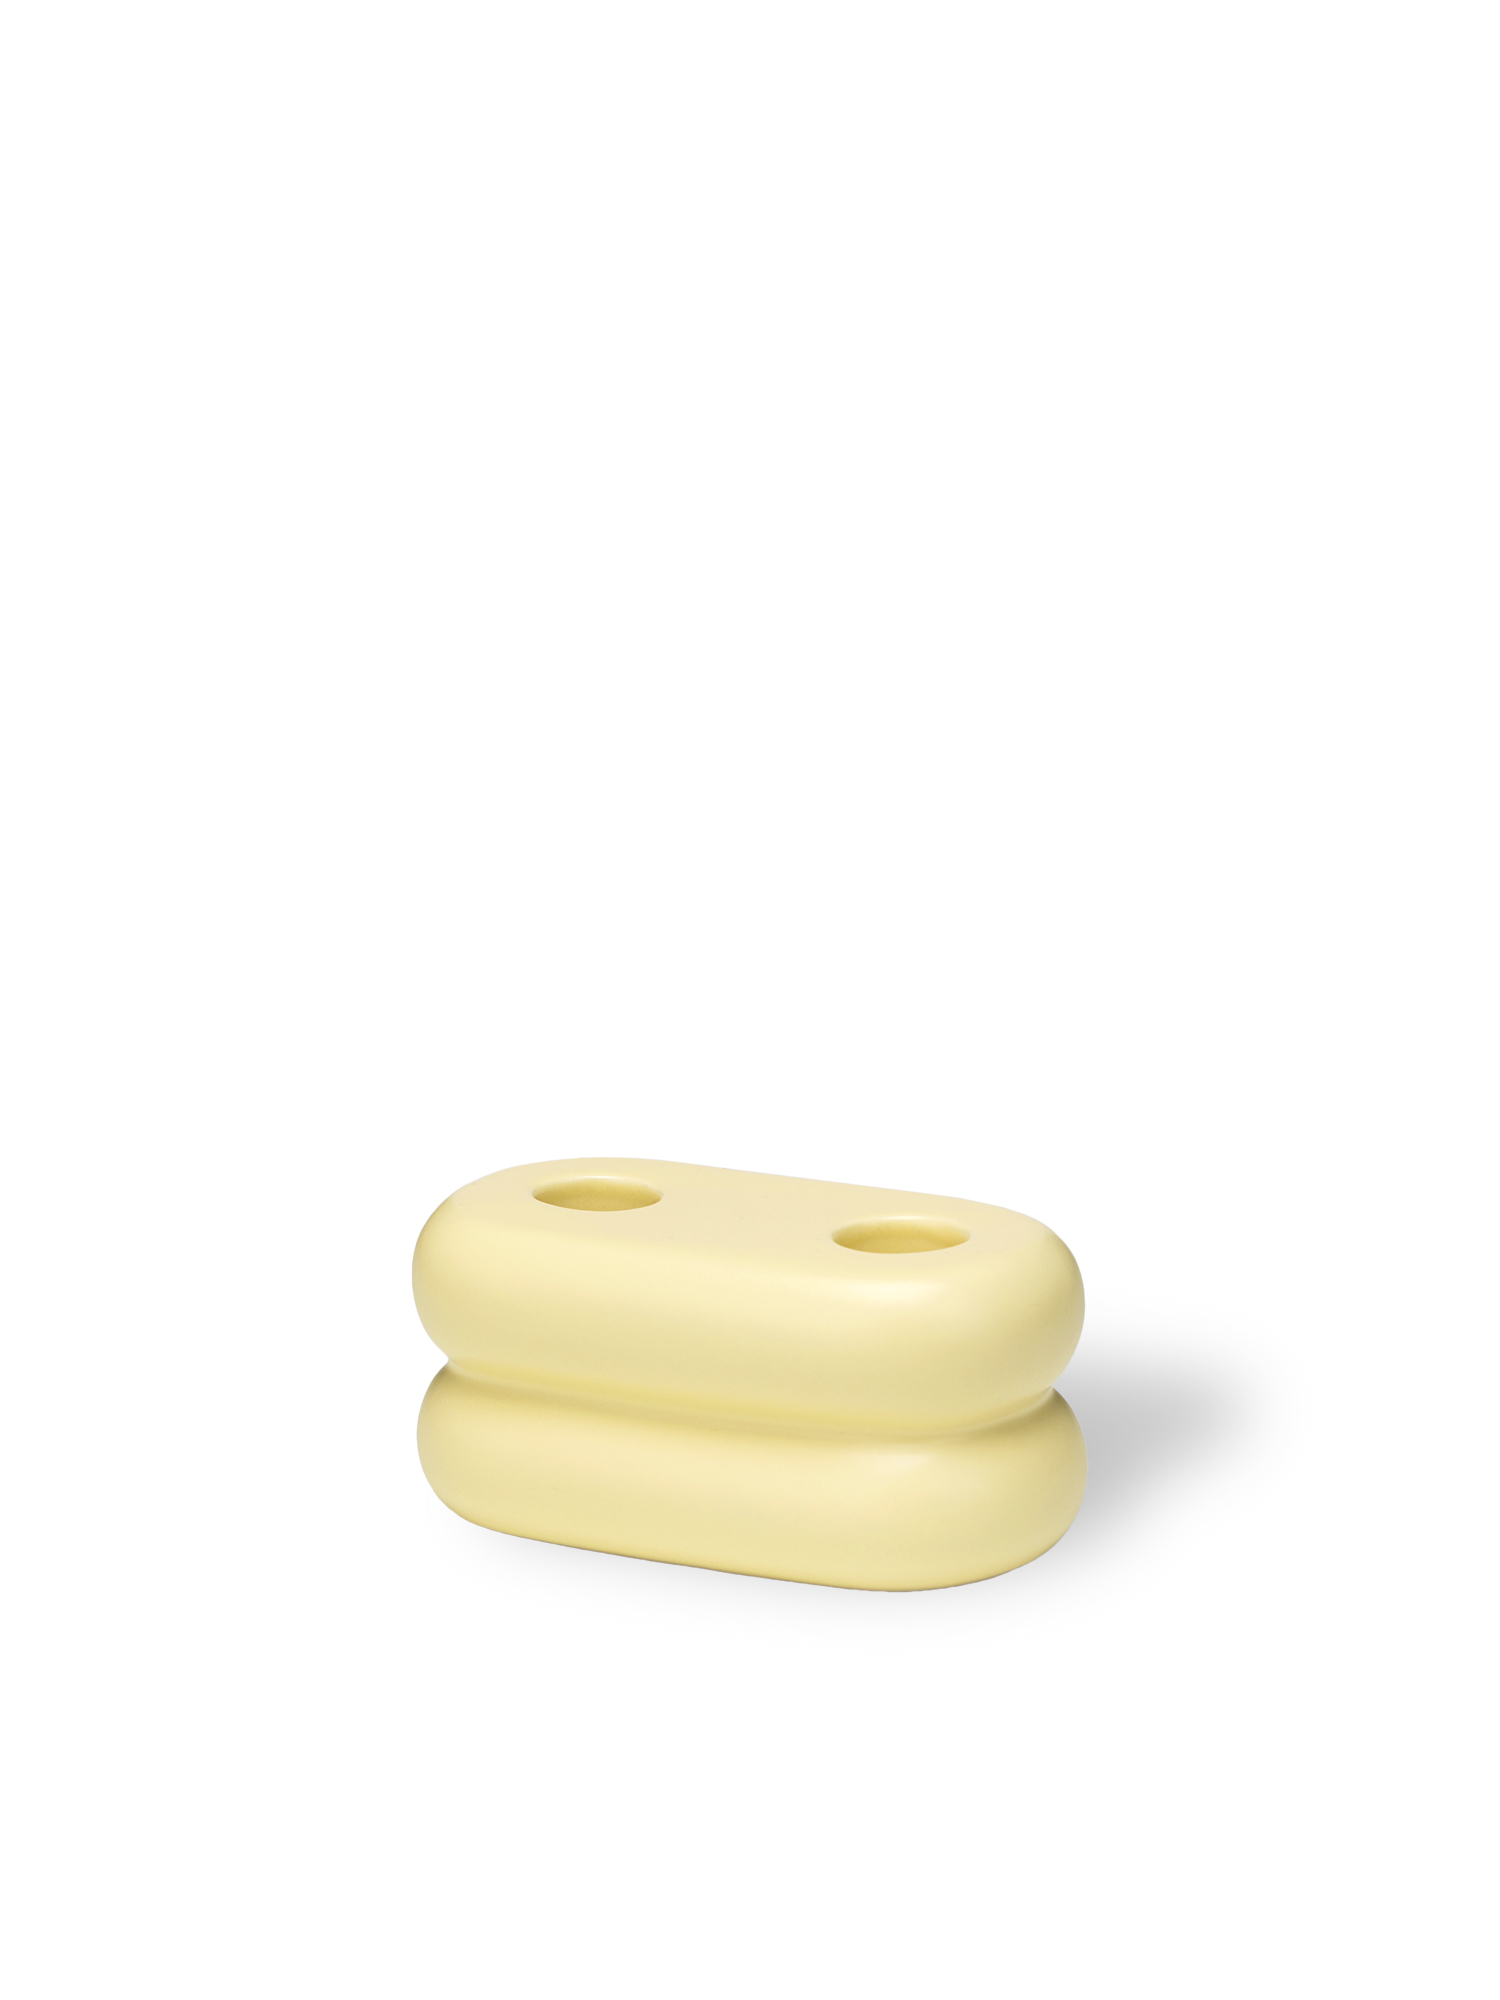 Stences Candleholder Repeat Soft Yellow